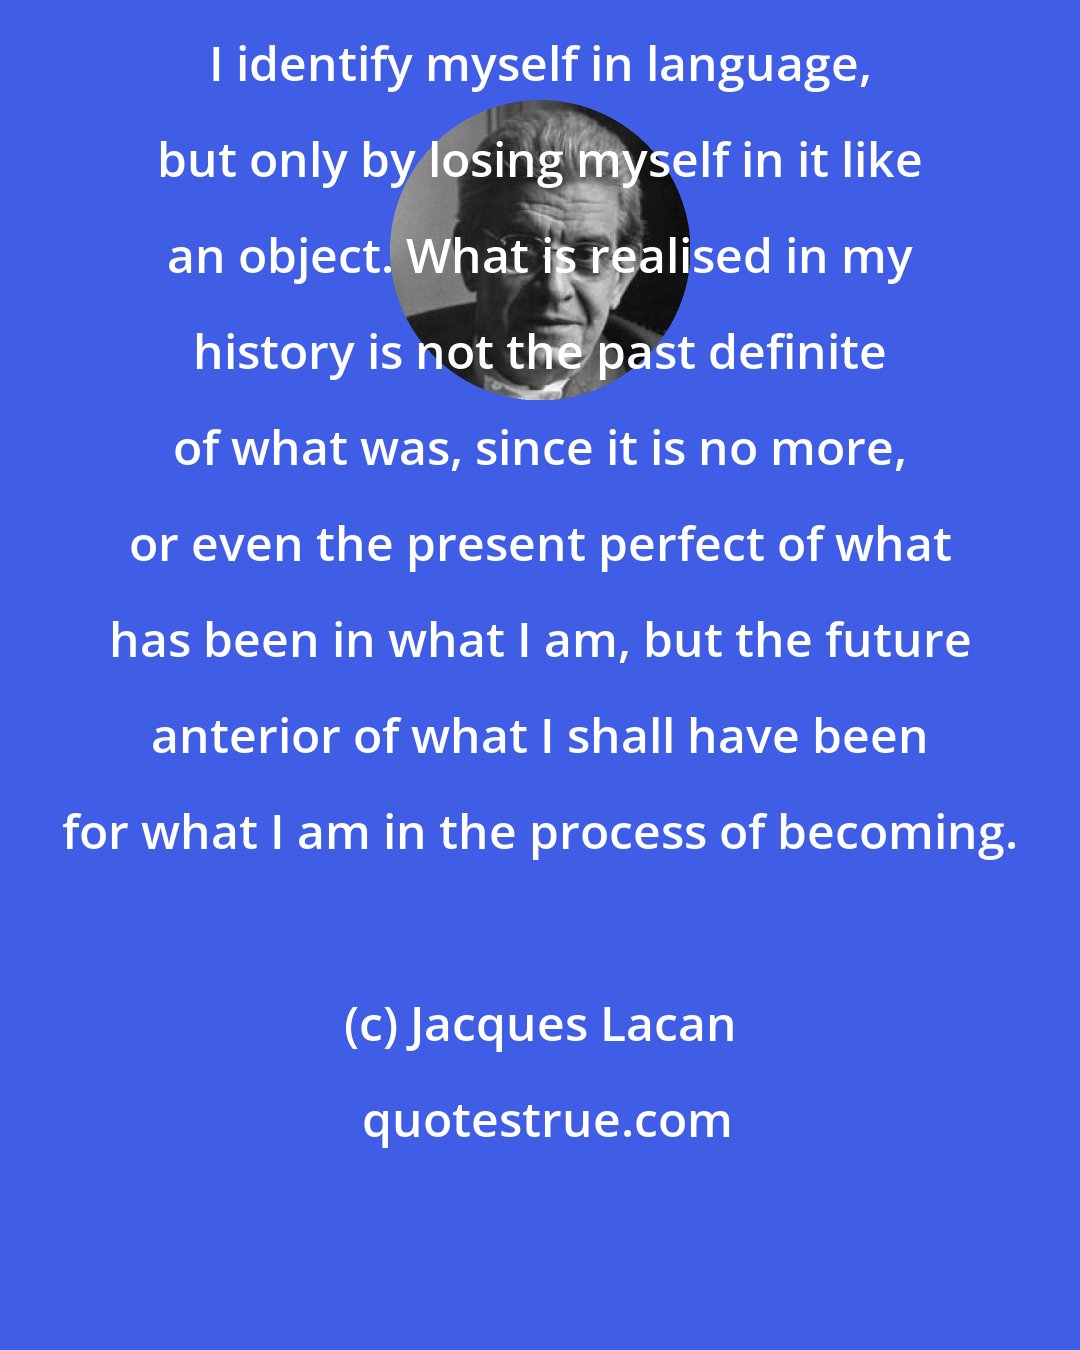 Jacques Lacan: I identify myself in language, but only by losing myself in it like an object. What is realised in my history is not the past definite of what was, since it is no more, or even the present perfect of what has been in what I am, but the future anterior of what I shall have been for what I am in the process of becoming.